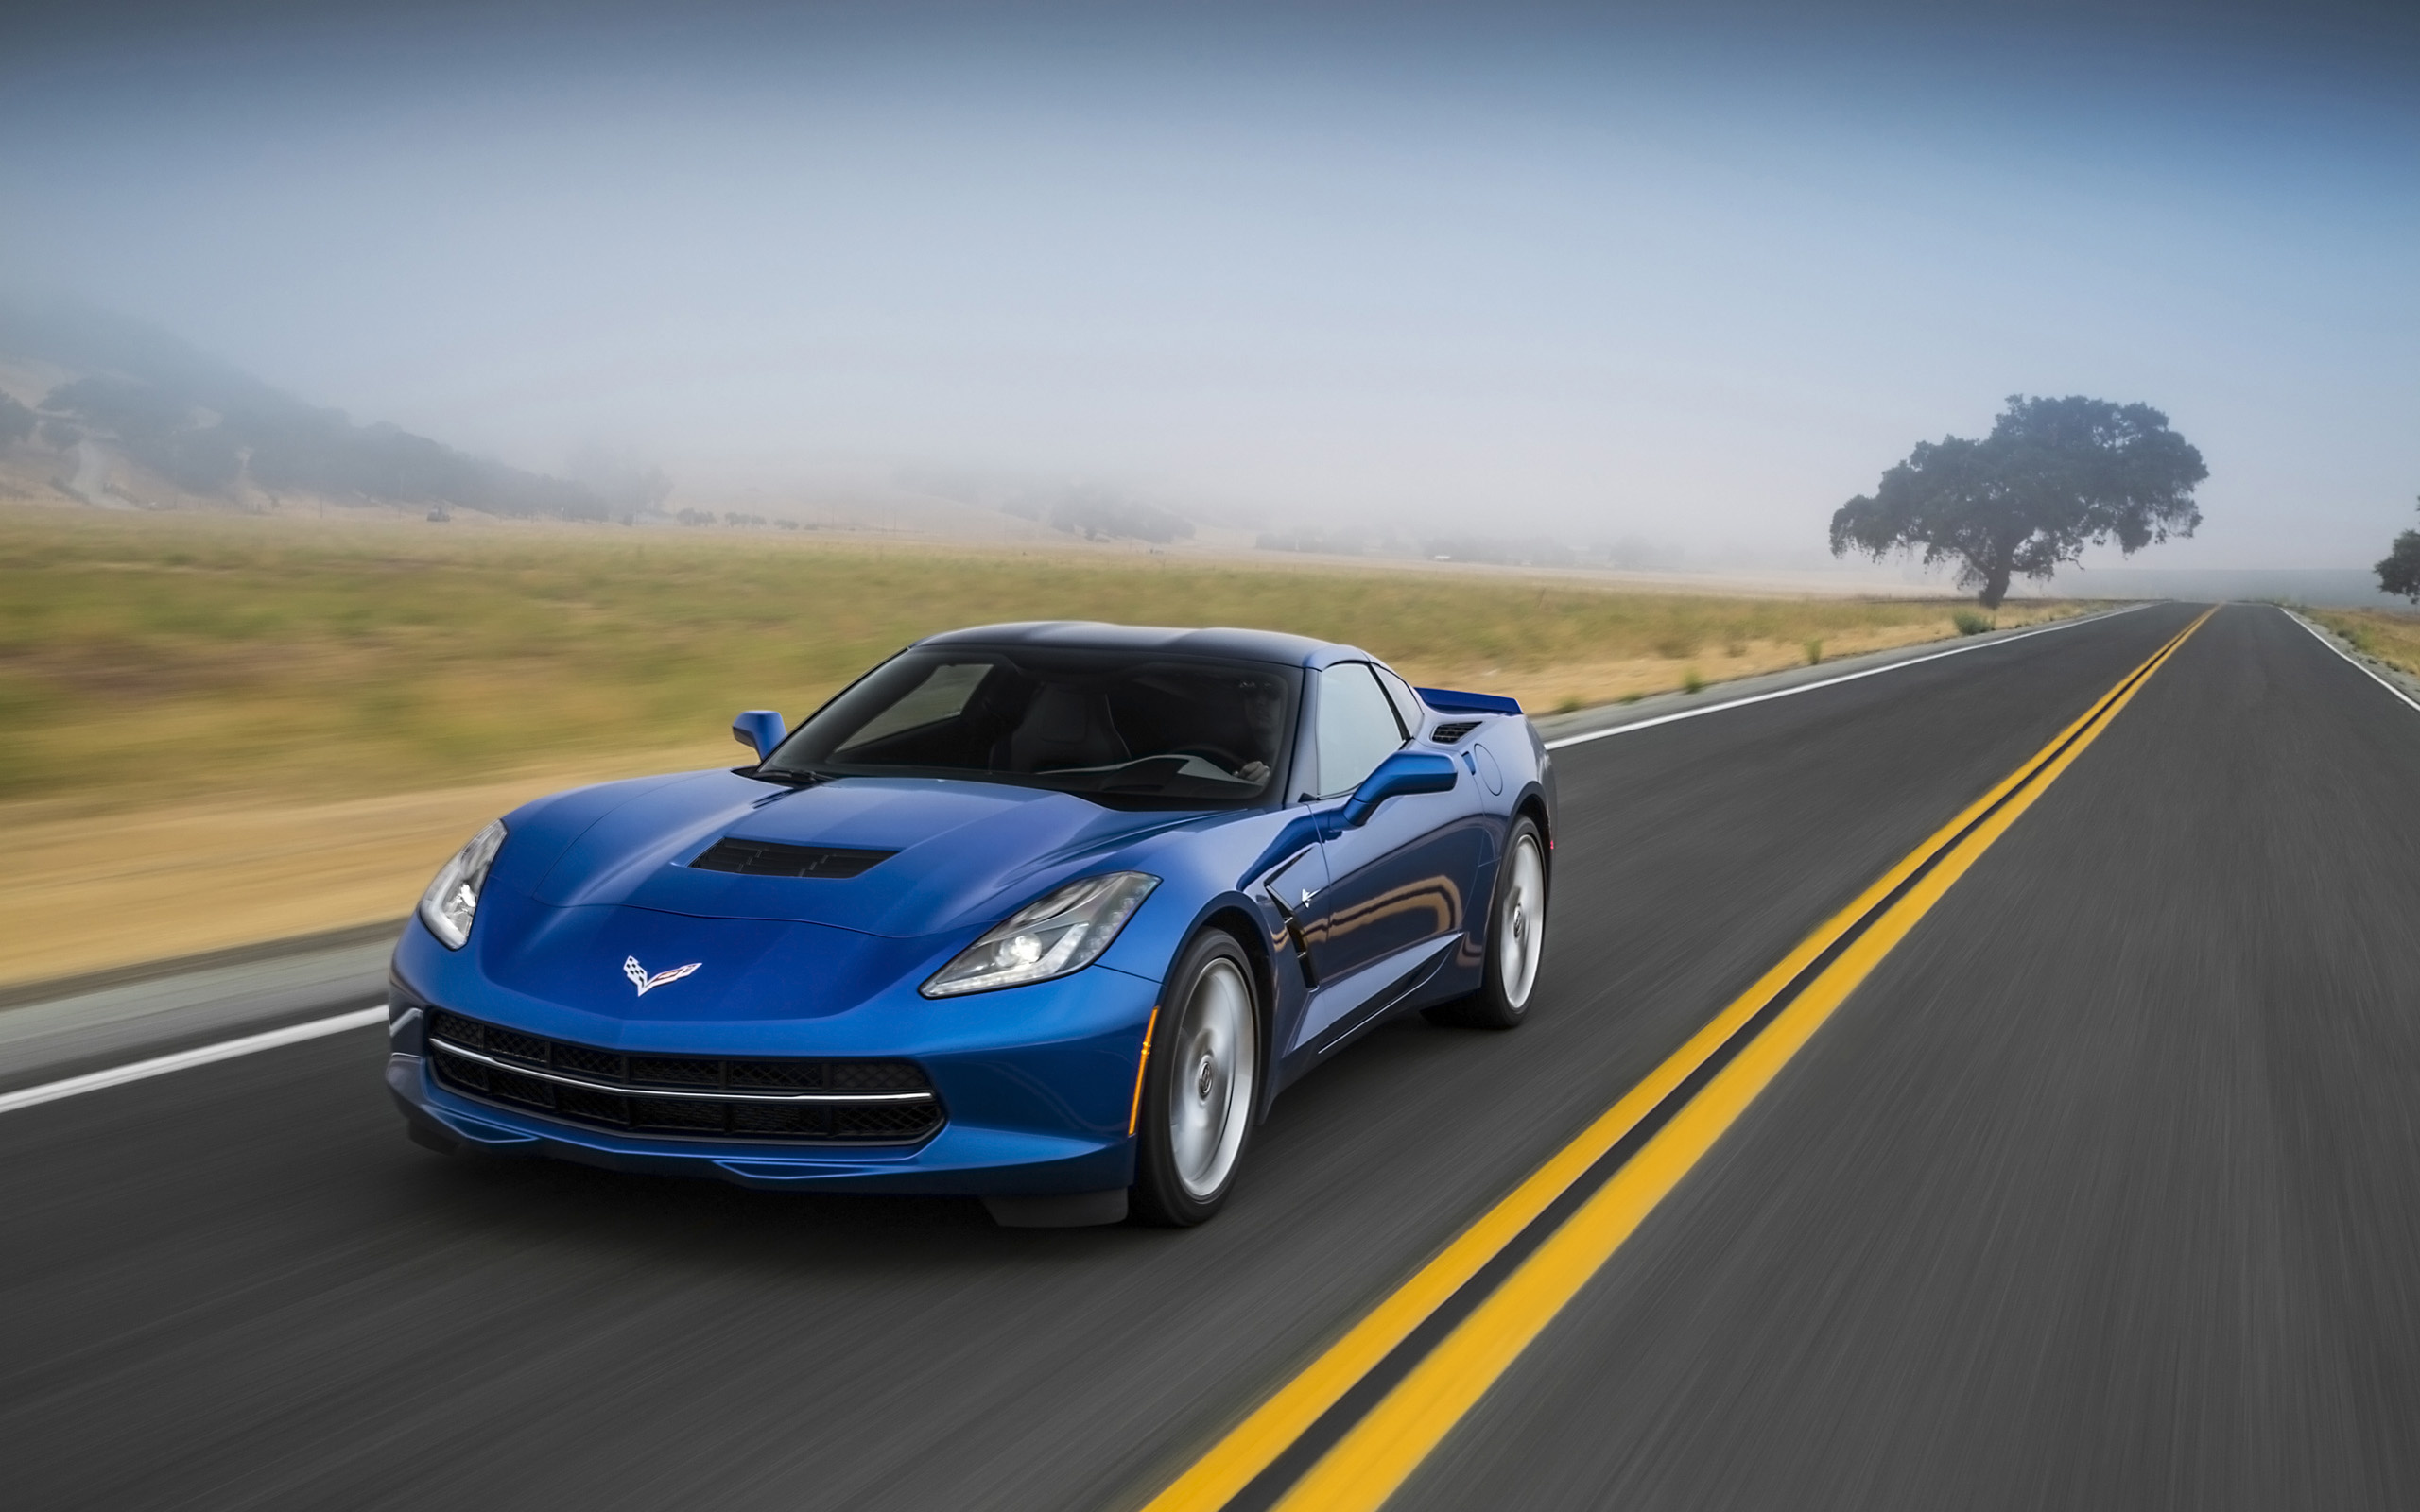 Corvette: Stingray C7, American supercar, A sports car equipped with a supercharged engine. 2560x1600 HD Wallpaper.